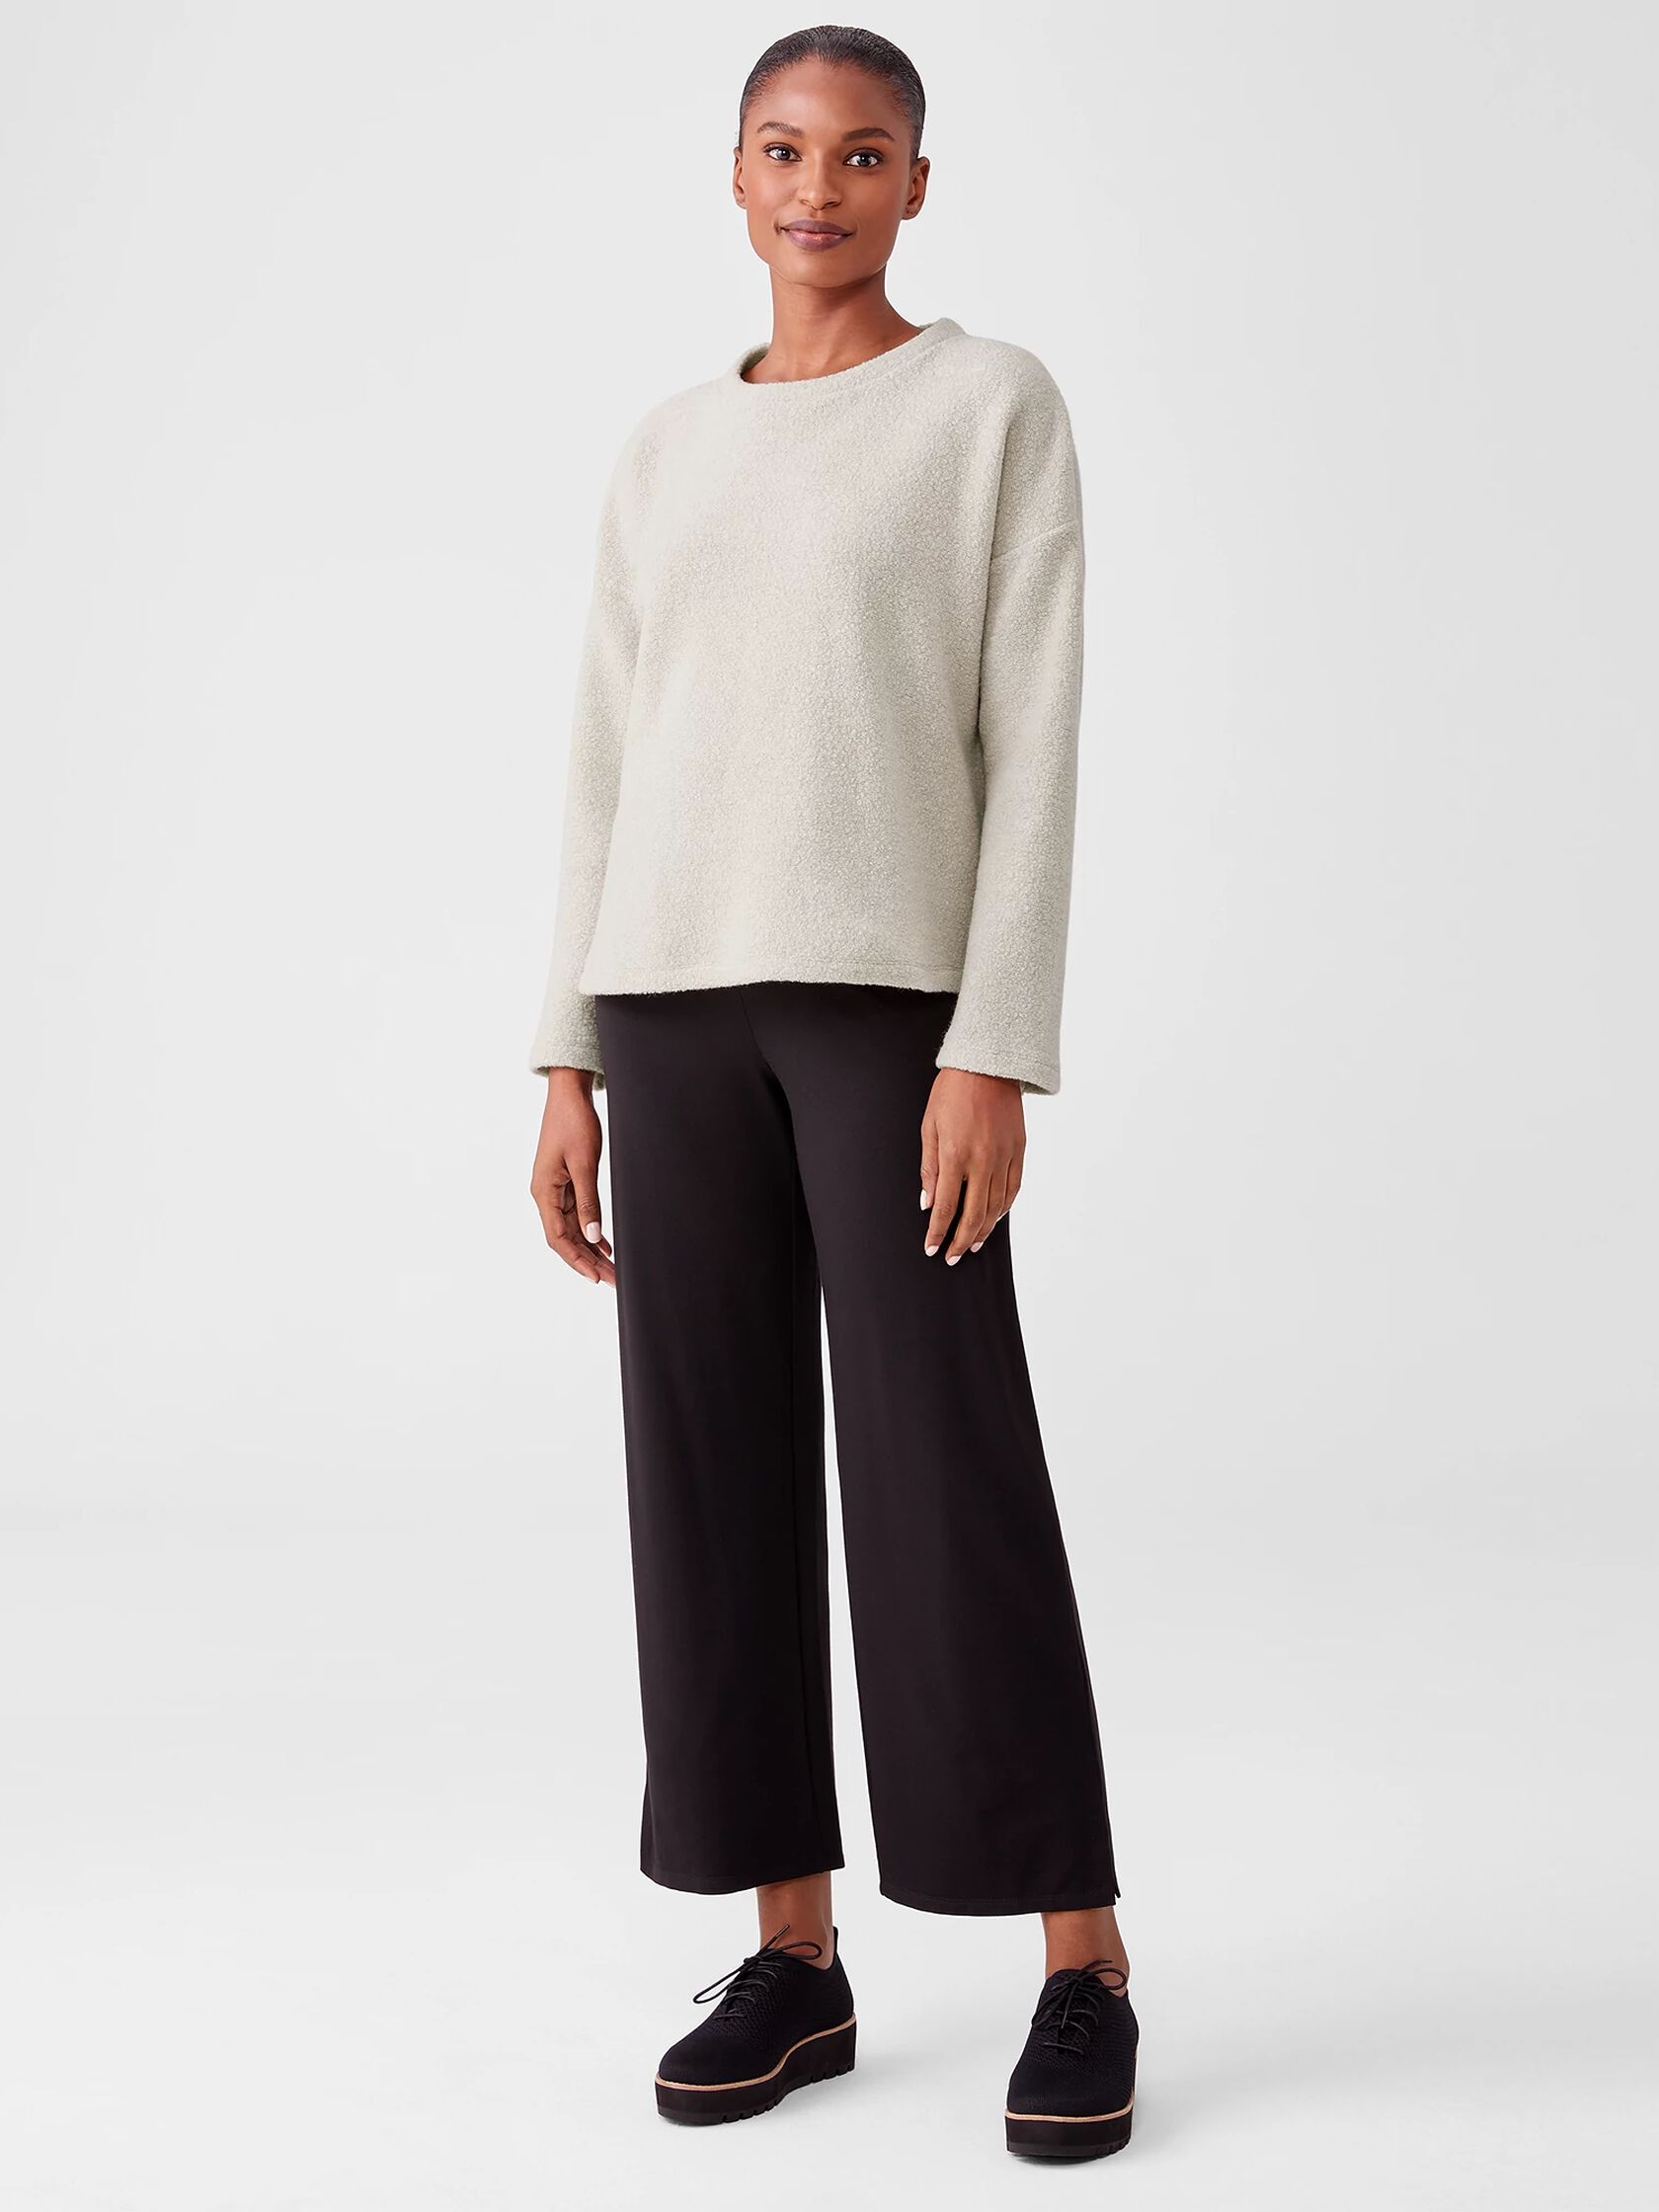 Boucle Wool Knit Crew Neck Box-Top | EILEEN FISHER